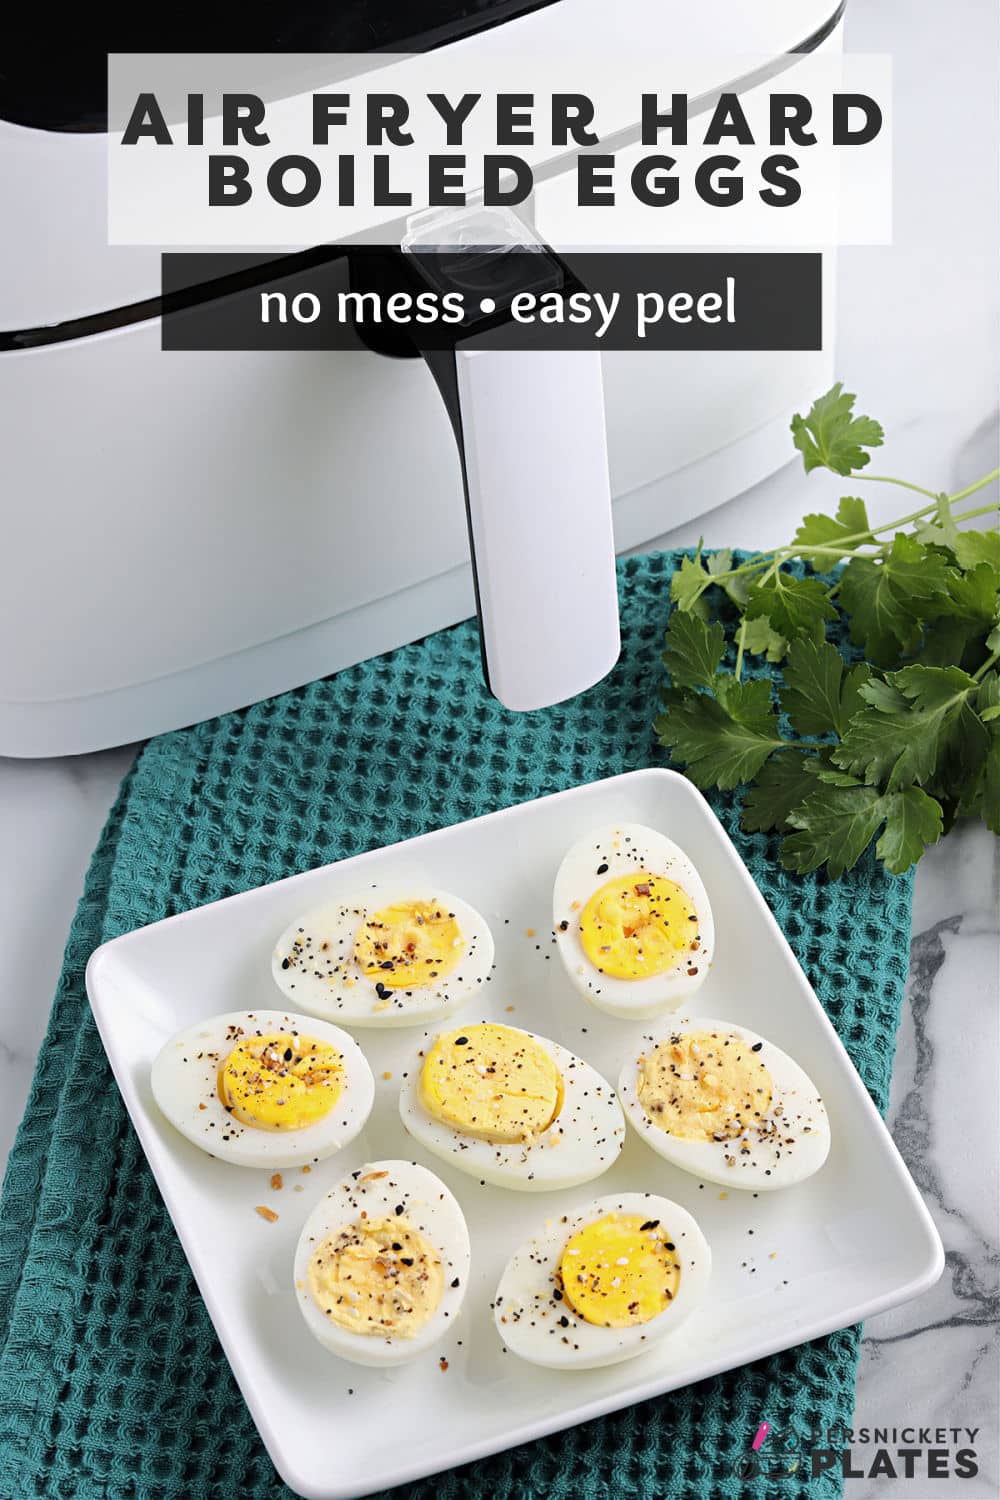 Making Air Fryer Hard Boiled Eggs is my new favorite method to cook a large batch of eggs. This method is quick and easy - no need to babysit a boiling pot. They peel easily and come out perfectly! | www.persnicketyplates.com